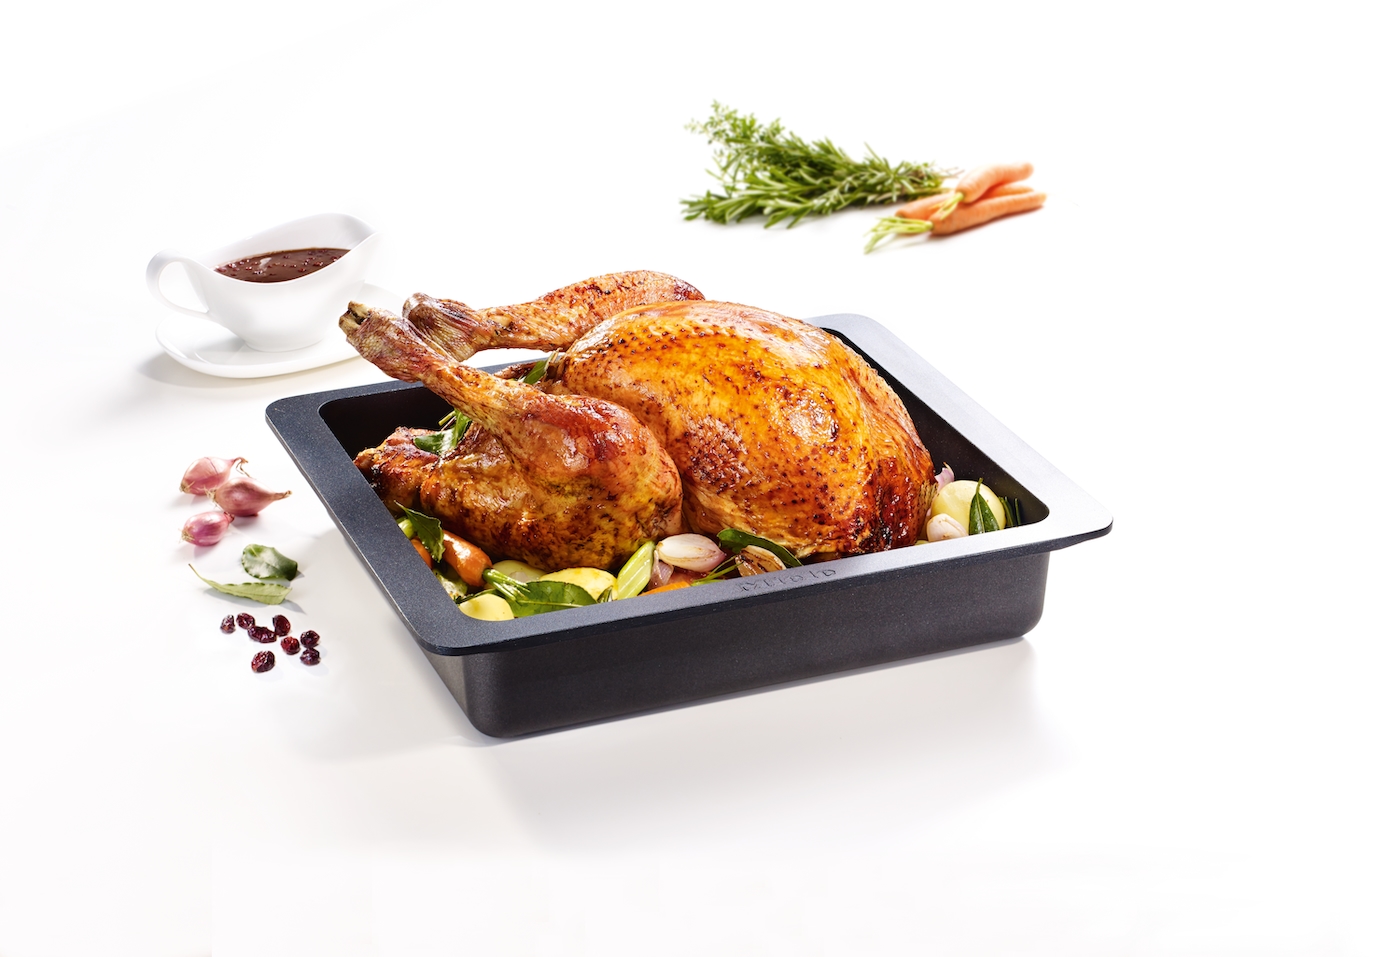 HUB 5001-XL Induction compatible gourmet oven dish product photo Laydowns Detail View1 ZOOM